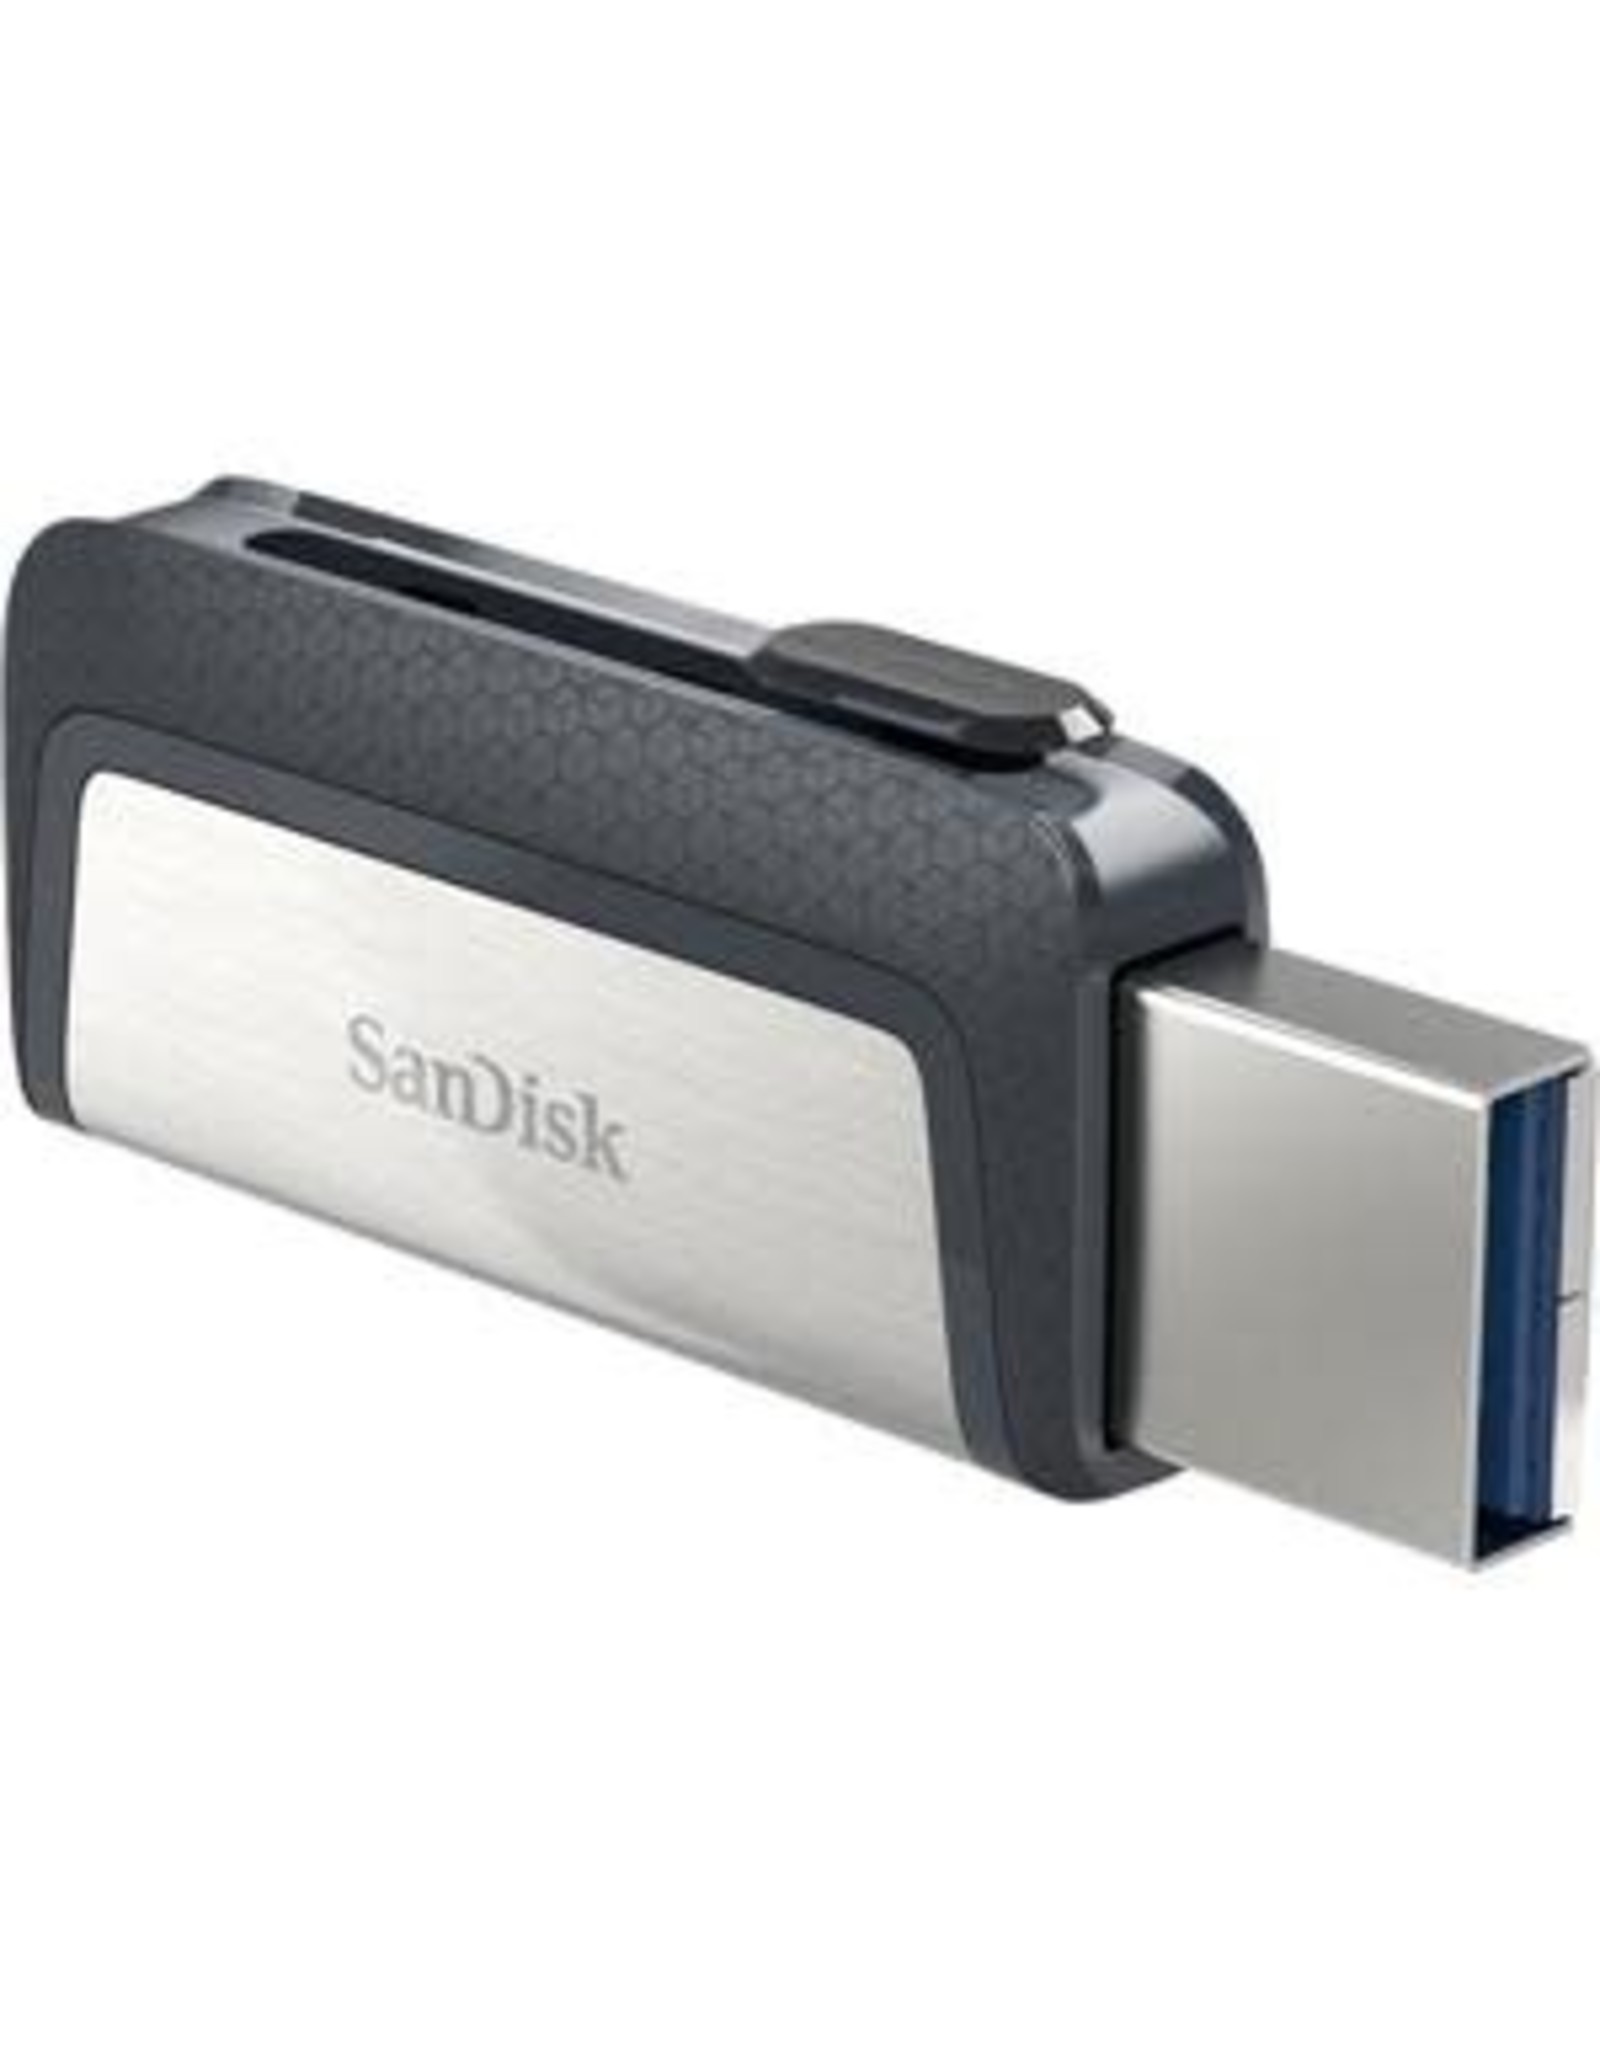 SanDisk SanDisk 32GB Ultra Dual USB 3.1/USB Type C Flash Drive - Central  Tech Store